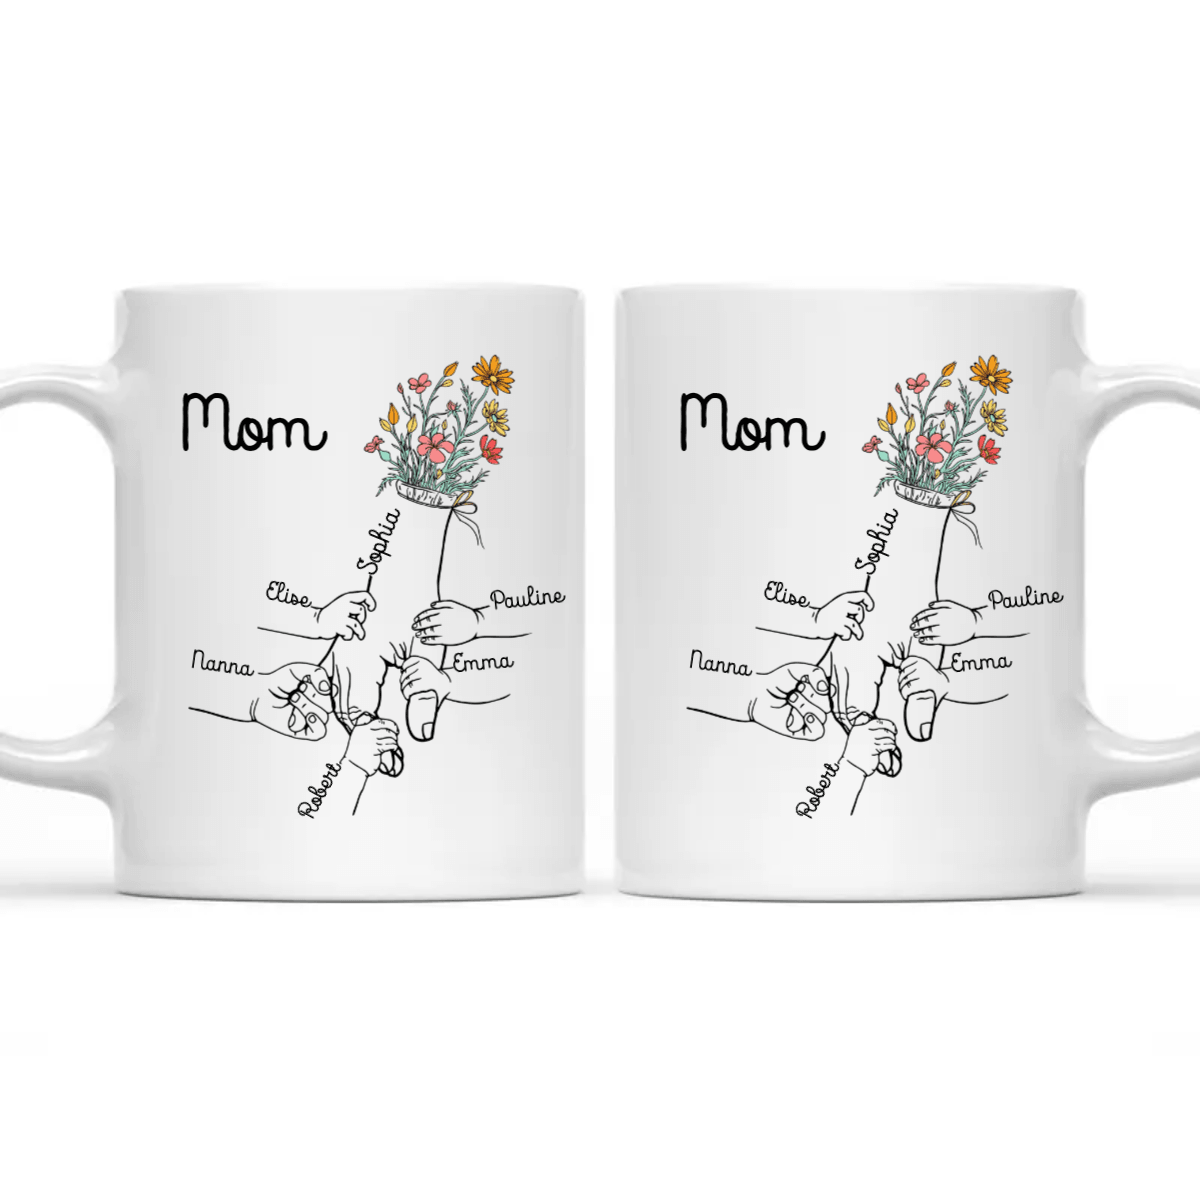 Holding Mom's Hand - Personalized Mug - Gift for Mom, Wife, Grandma, Mother's Day